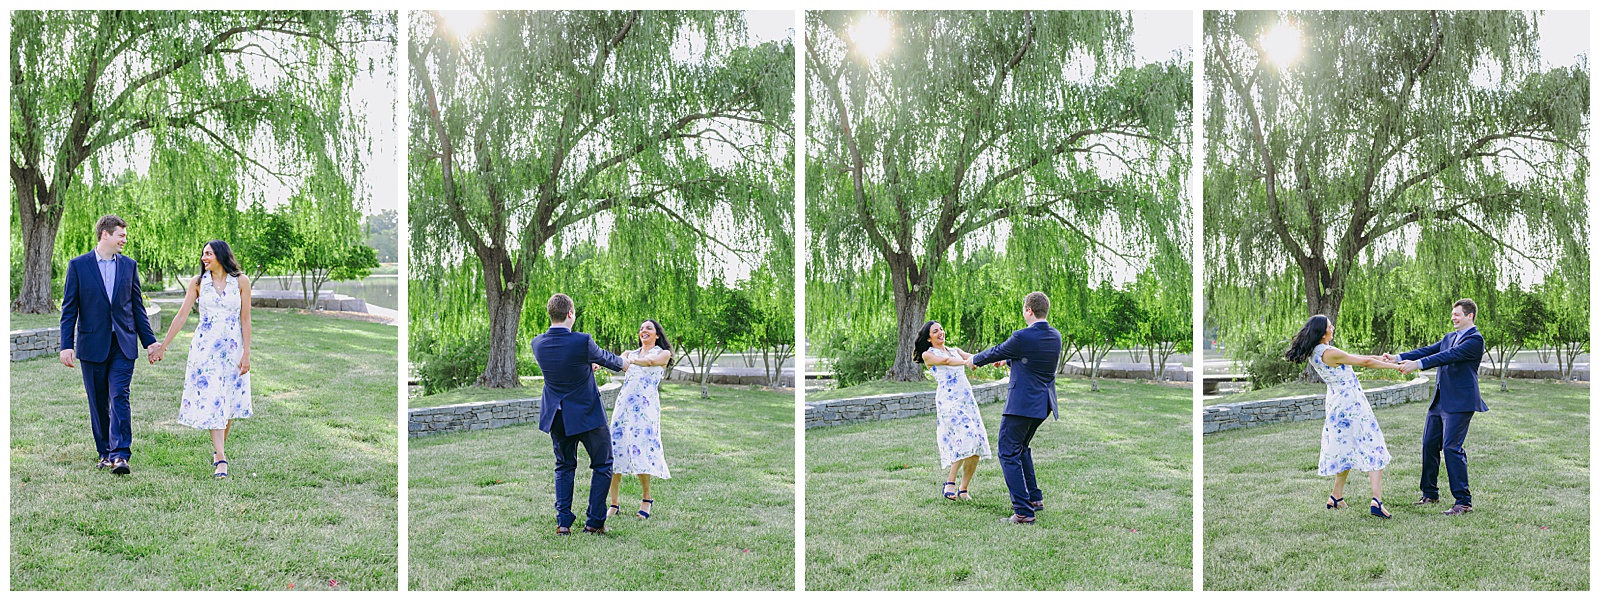 National Mall Engagement Photos couples spinning